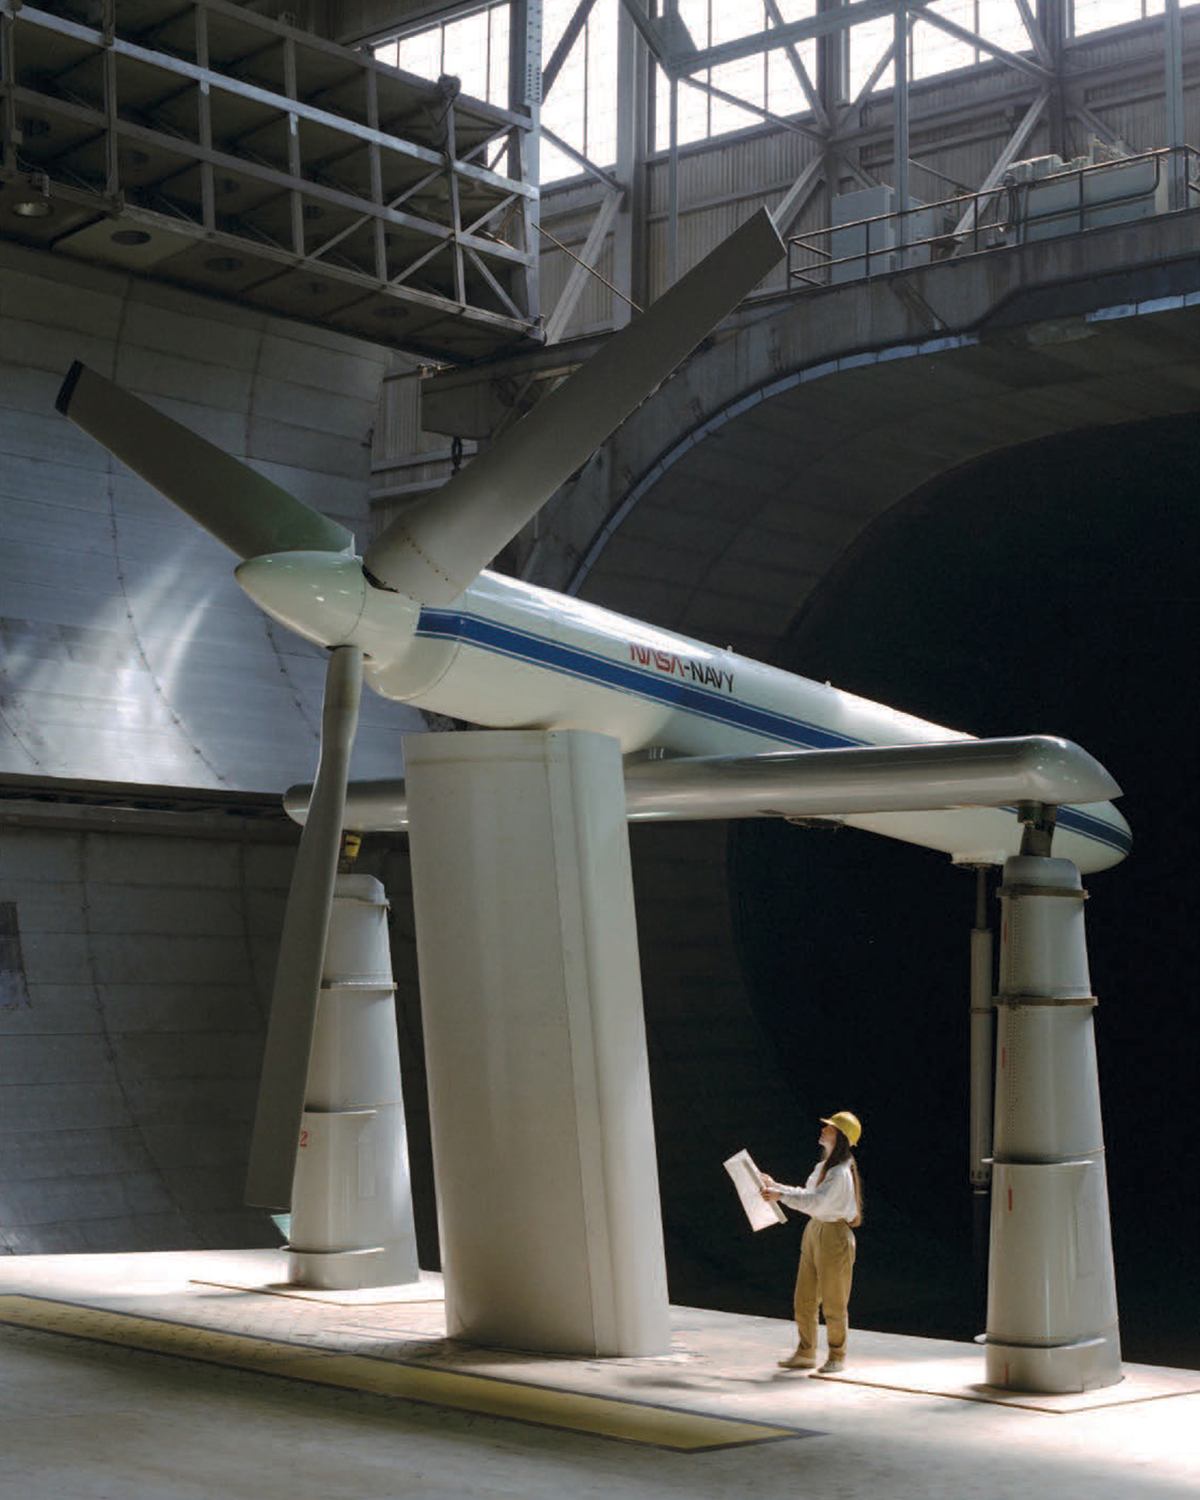 A woman wearing a hard hat and holding a large drawing looks up at a huge propeller with 3 long gray blades that is being tested inside a wind tunnel.